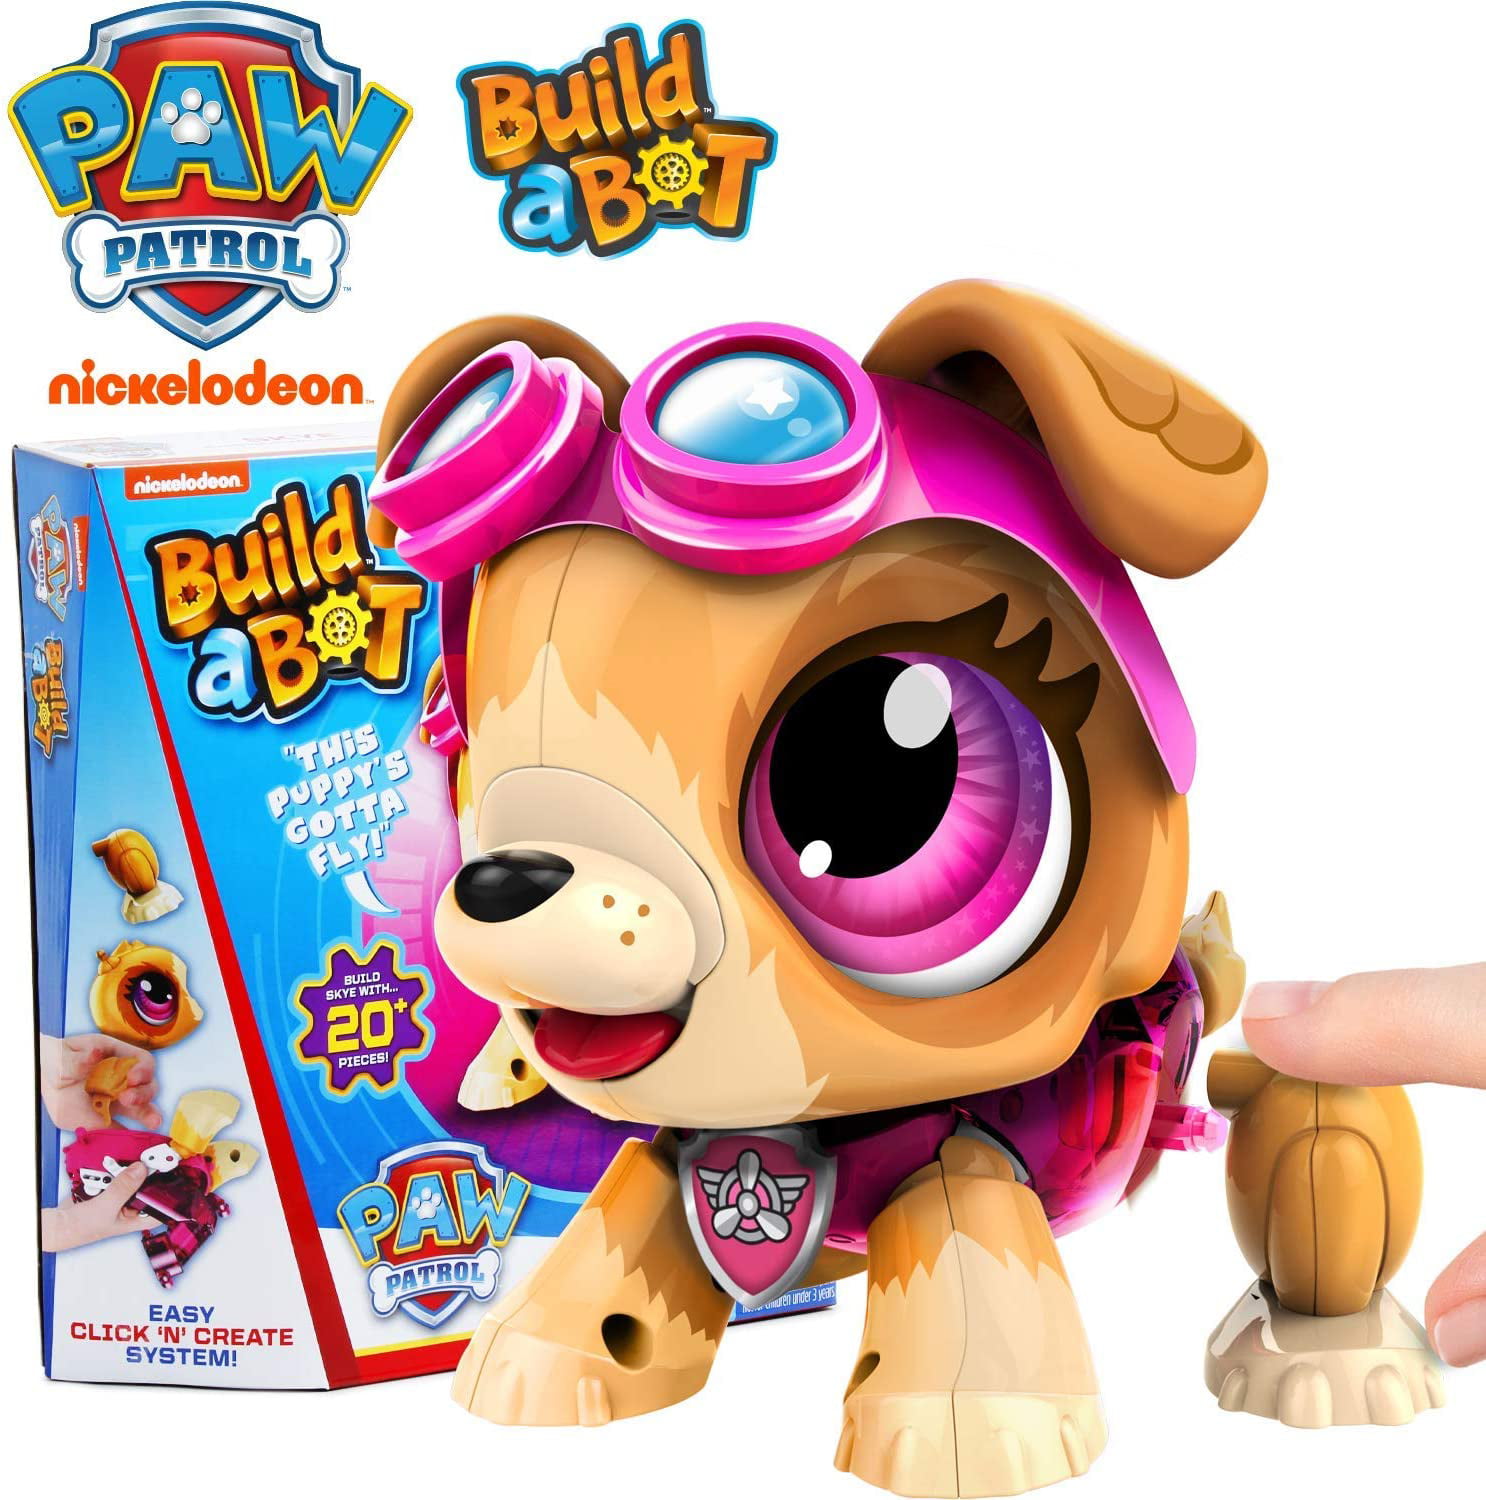 Paw Patrol Toys for Girls - Build a Bot Robots for Kids - Stem for Learning Toys Educational Toys for Kids Ages 3-10 - Walmart.com